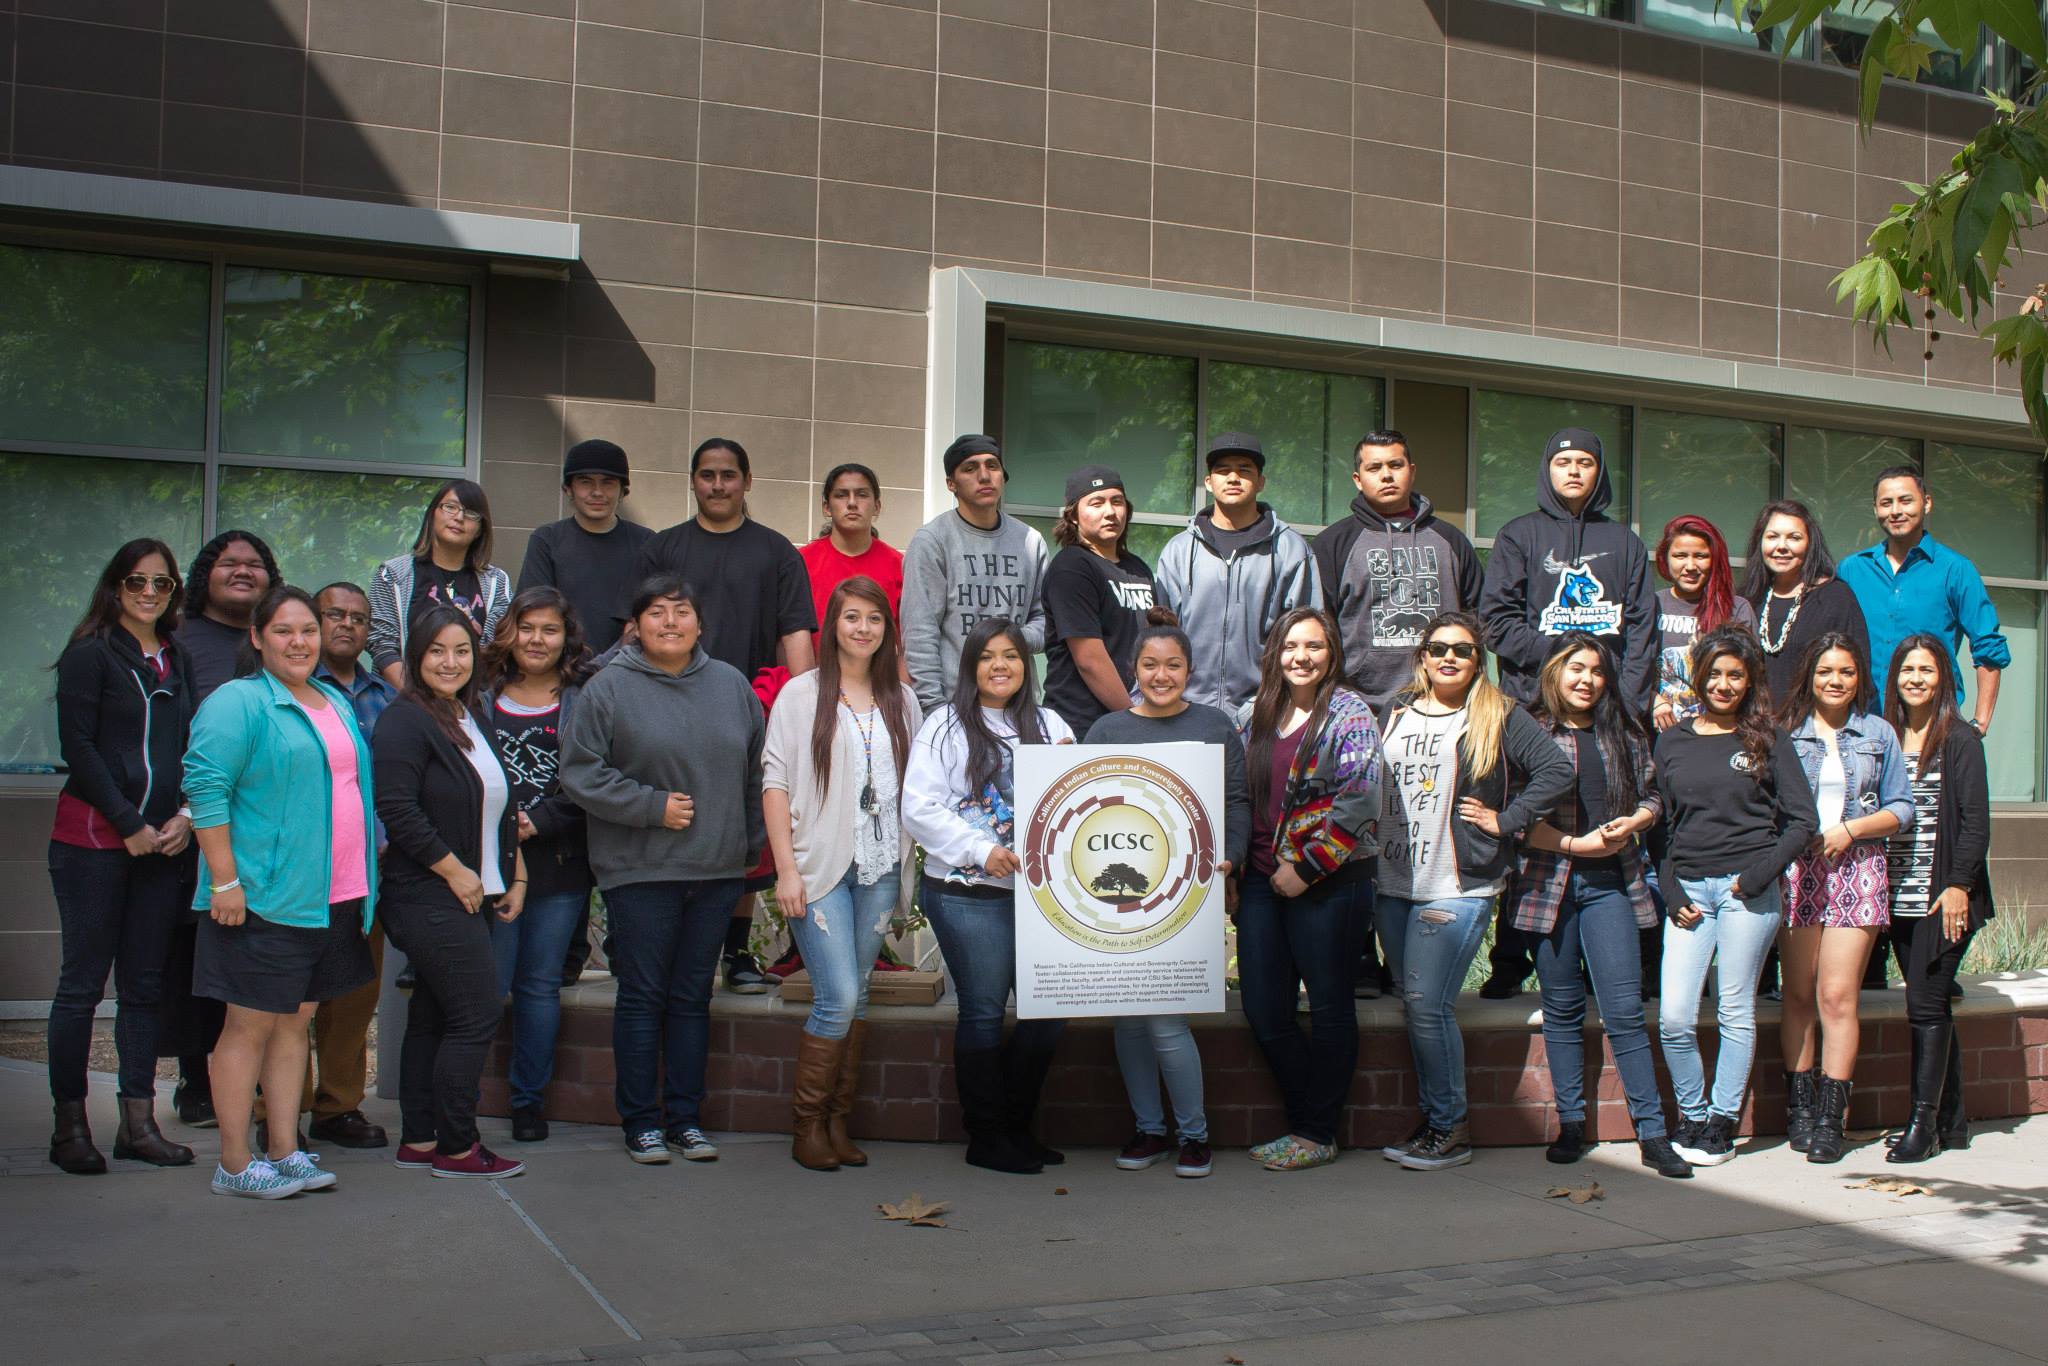 A large group of Noli Middle & High School students standing together in two rows outside of a building, and two people in the front row are holding a sign with the CICSC logo